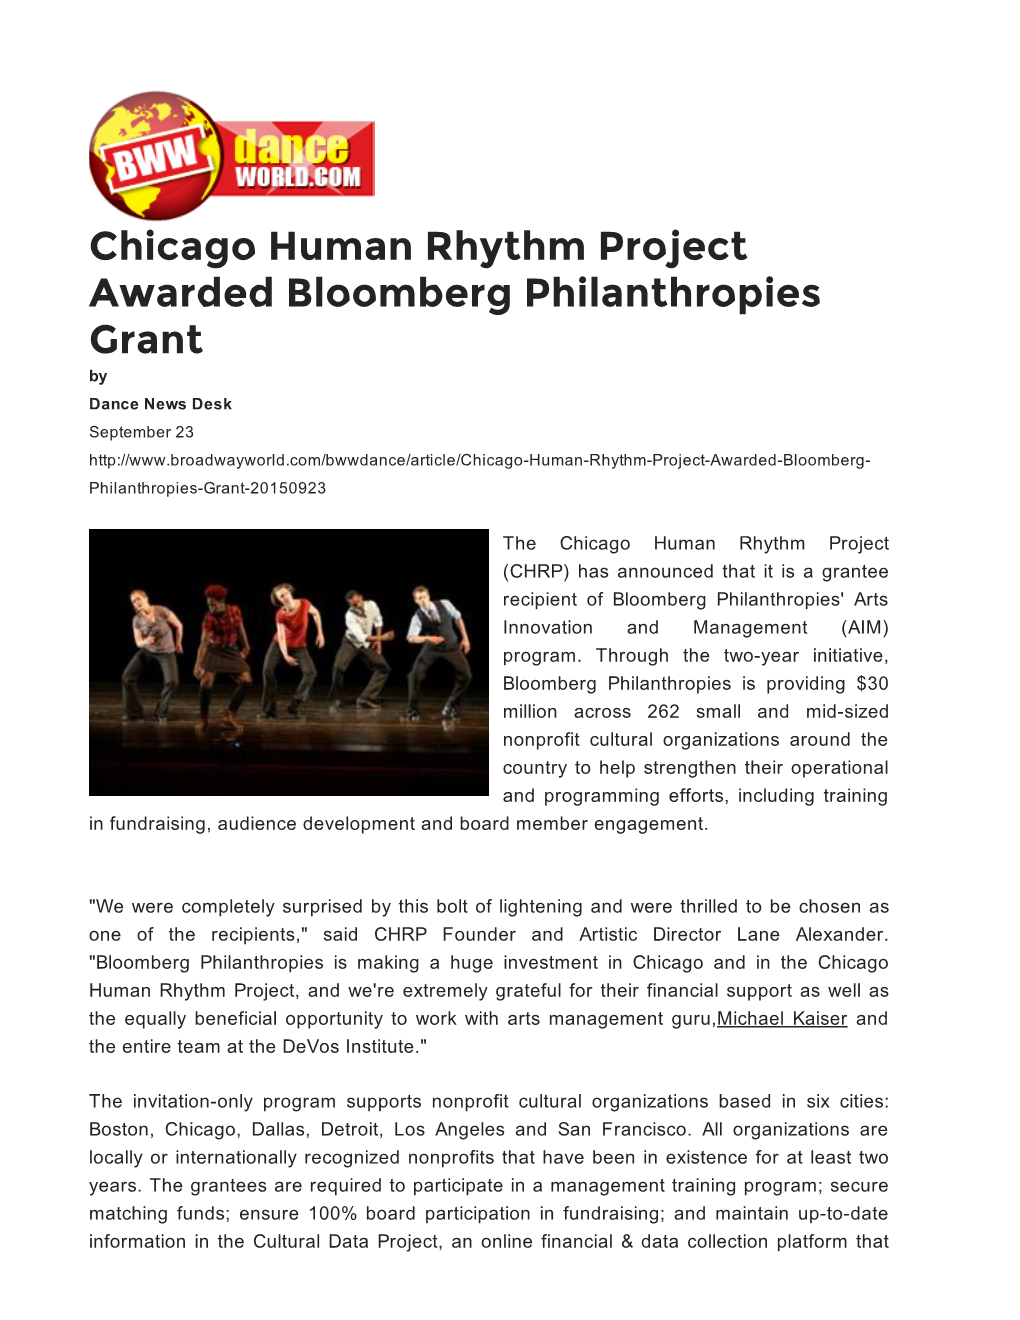 Chicago Human Rhythm Project Awarded Bloomberg Philanthropies